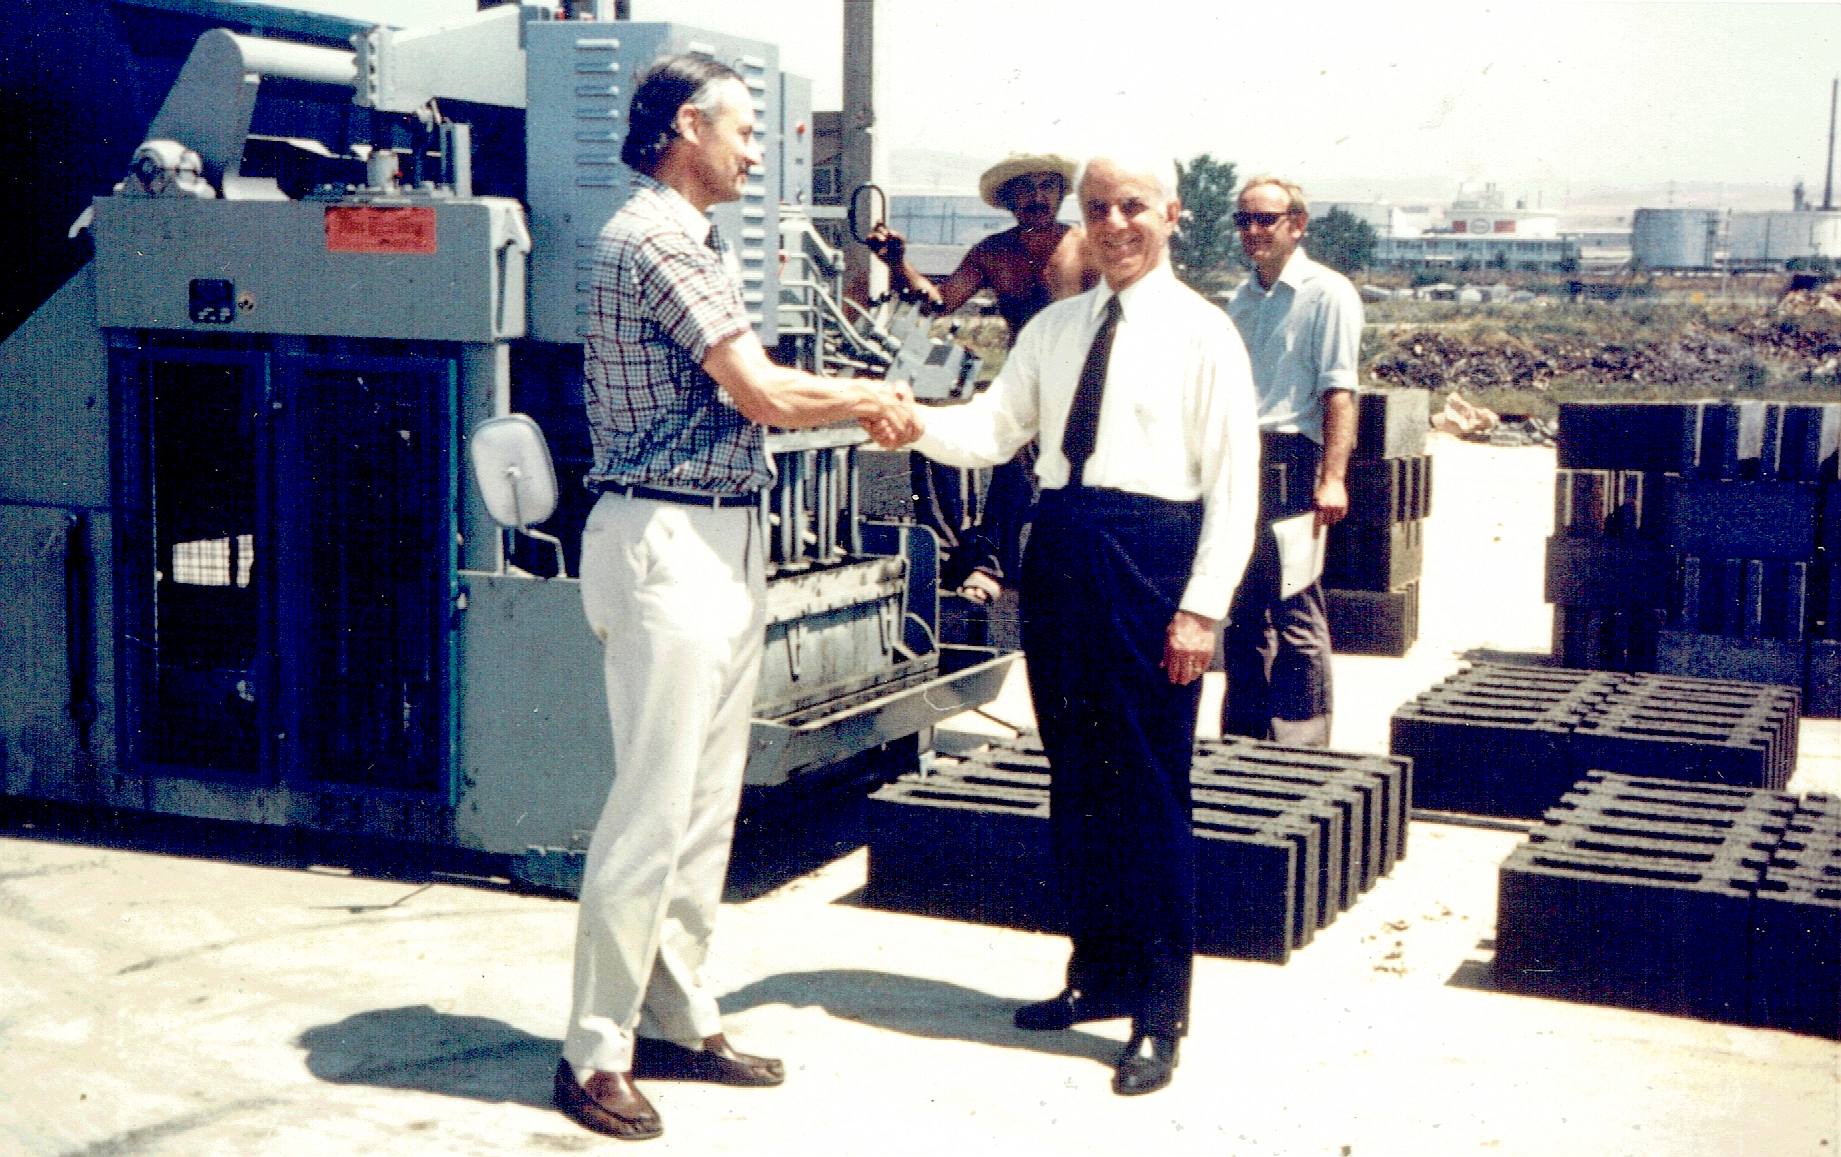 Marcel Paulos and plant foreman with Nelson Kruschandl (son of Edward) wearing sunglasses